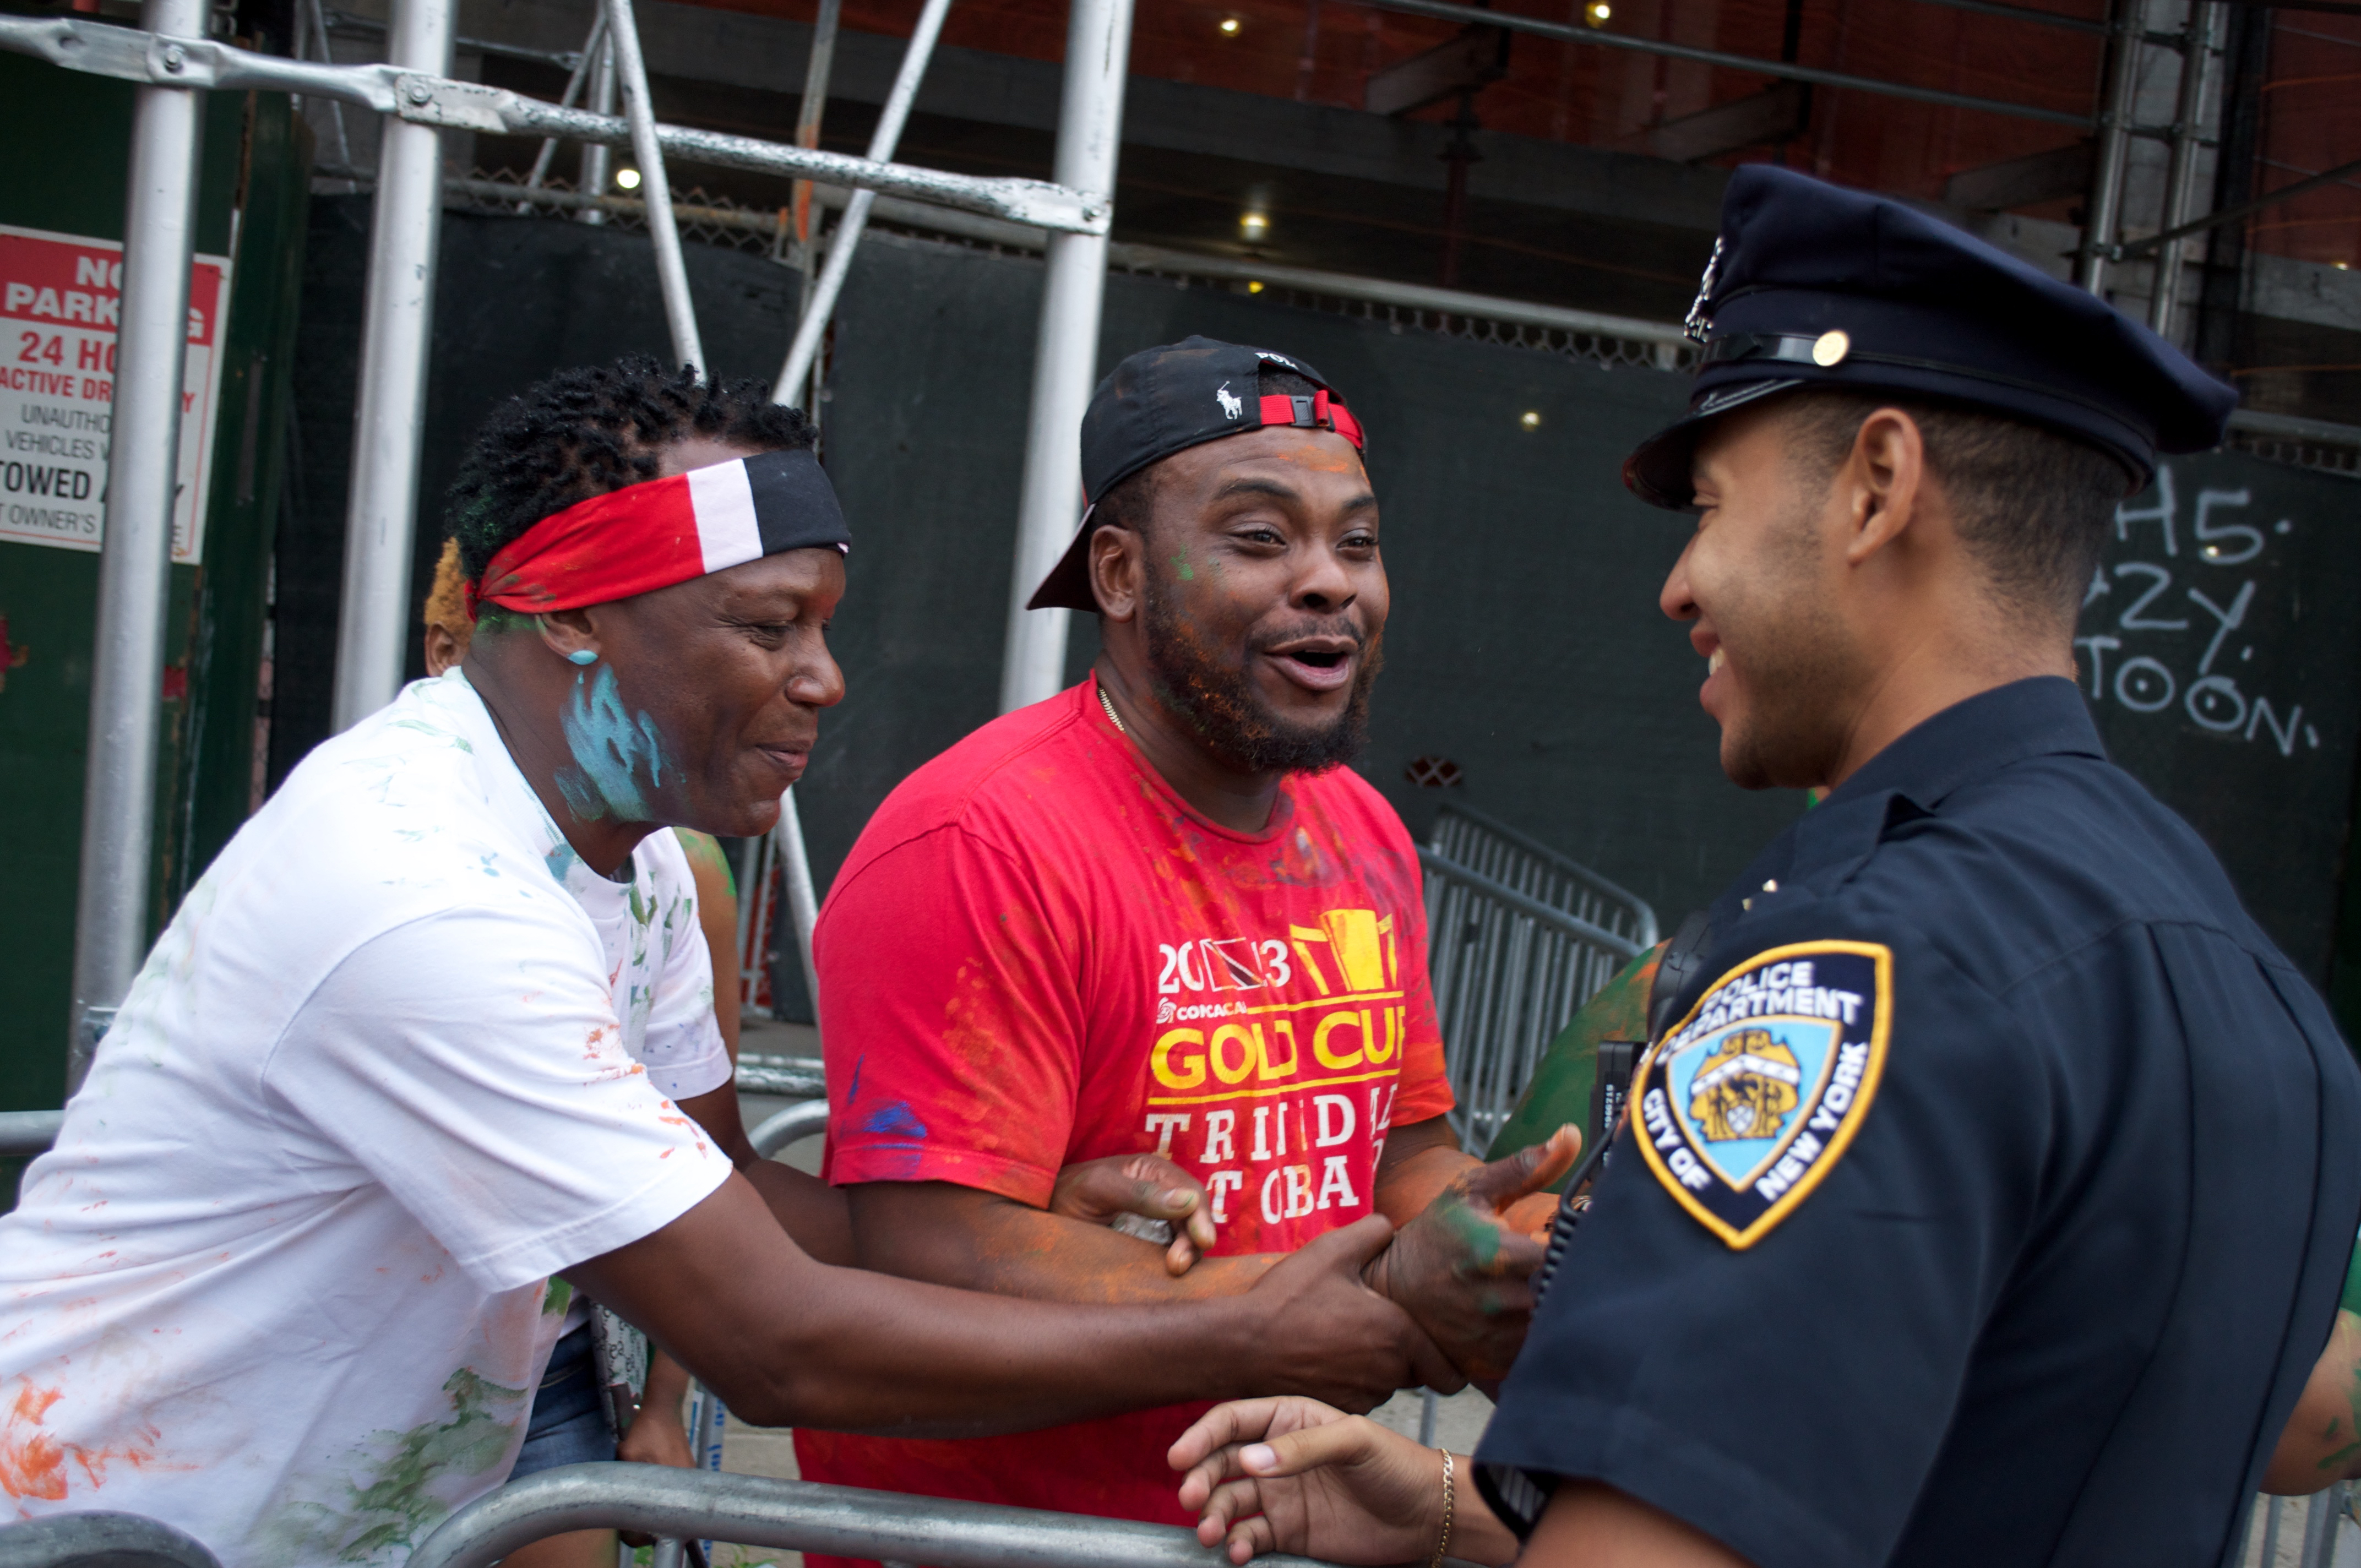 The NYPD deployed several thousand officers to patrol J'Ouvert.